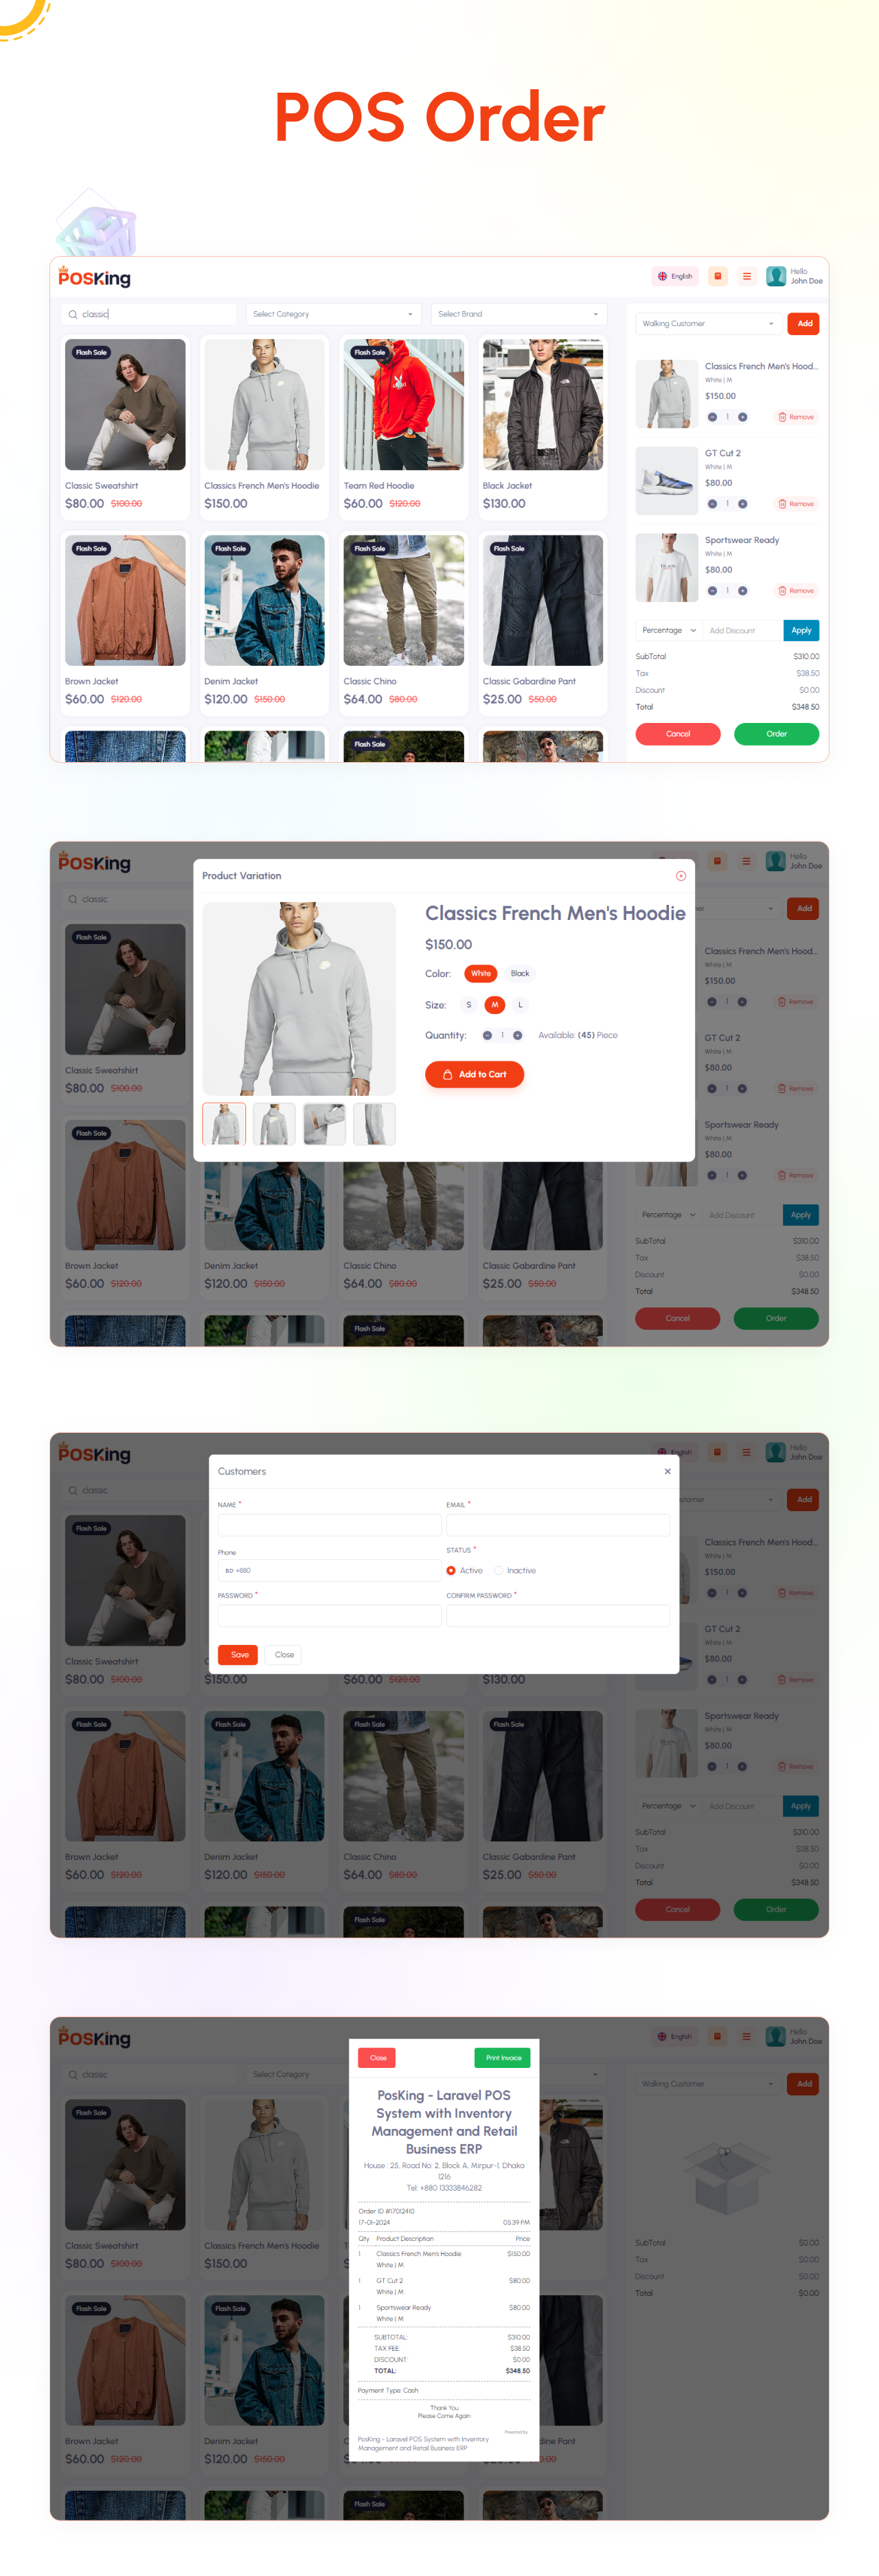 Responsive User Interface and simple point of sale design